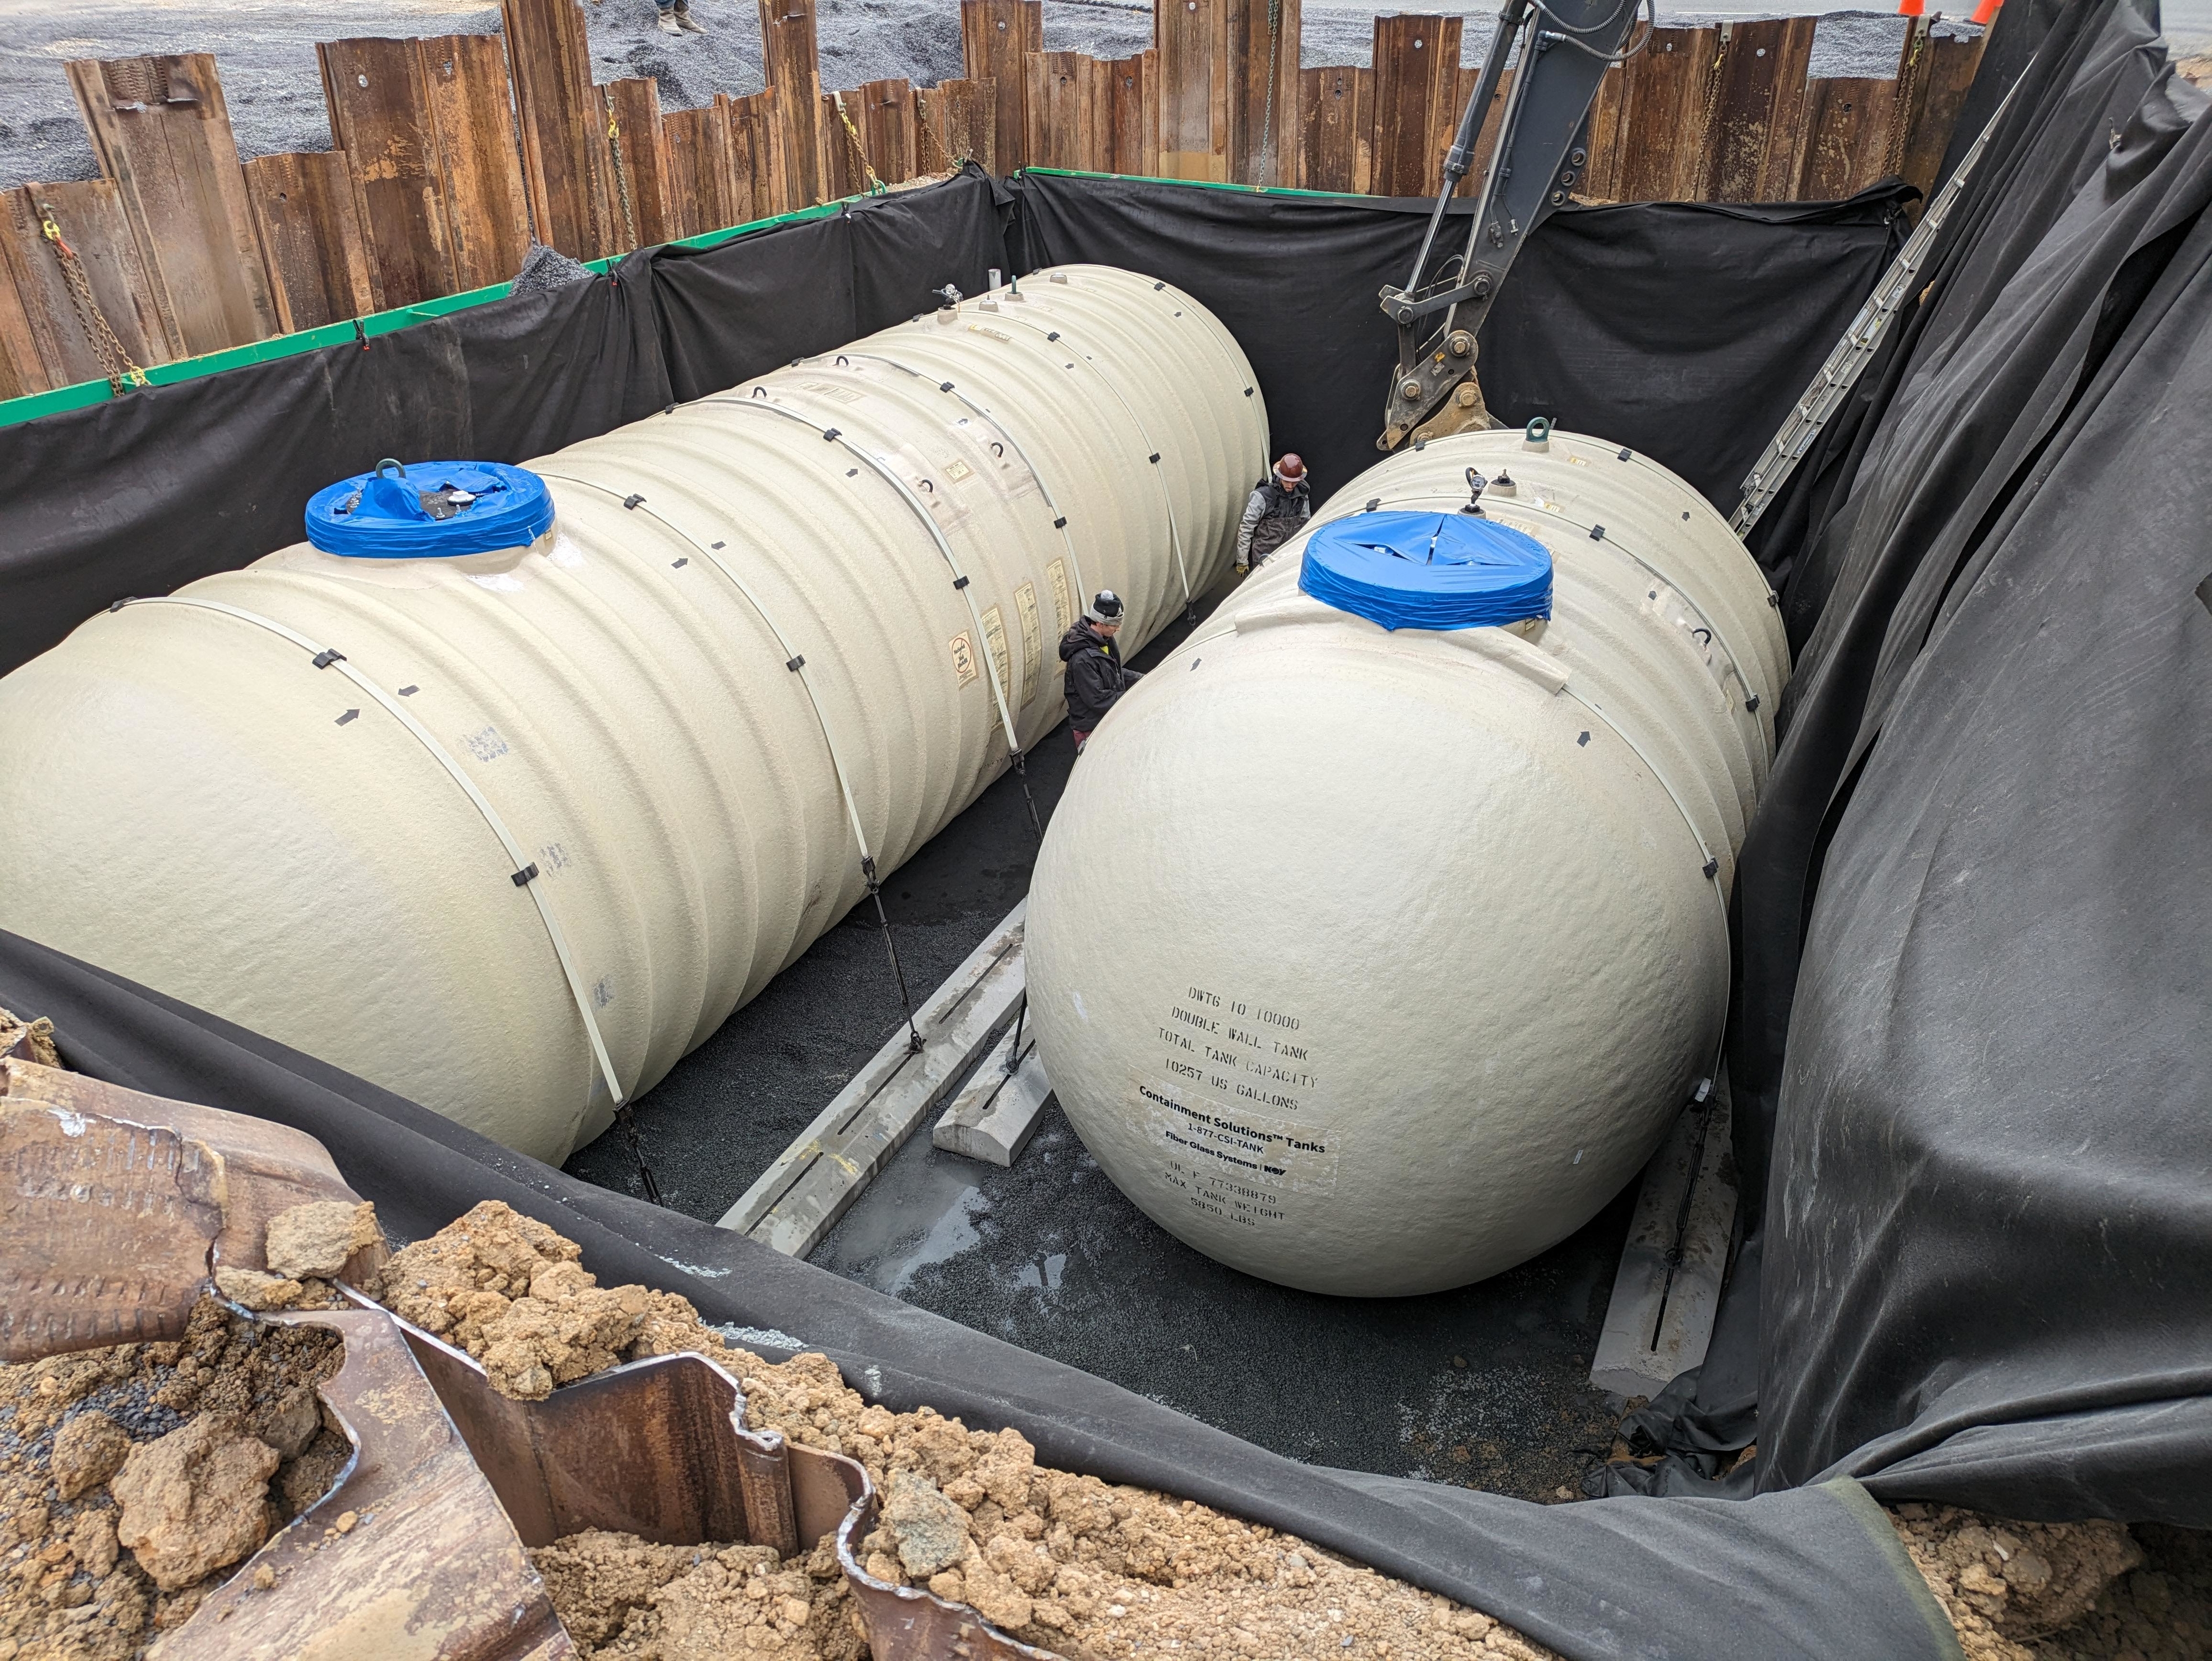 Two large, cylindrical tanks installed underground with visible pipes and protective covering